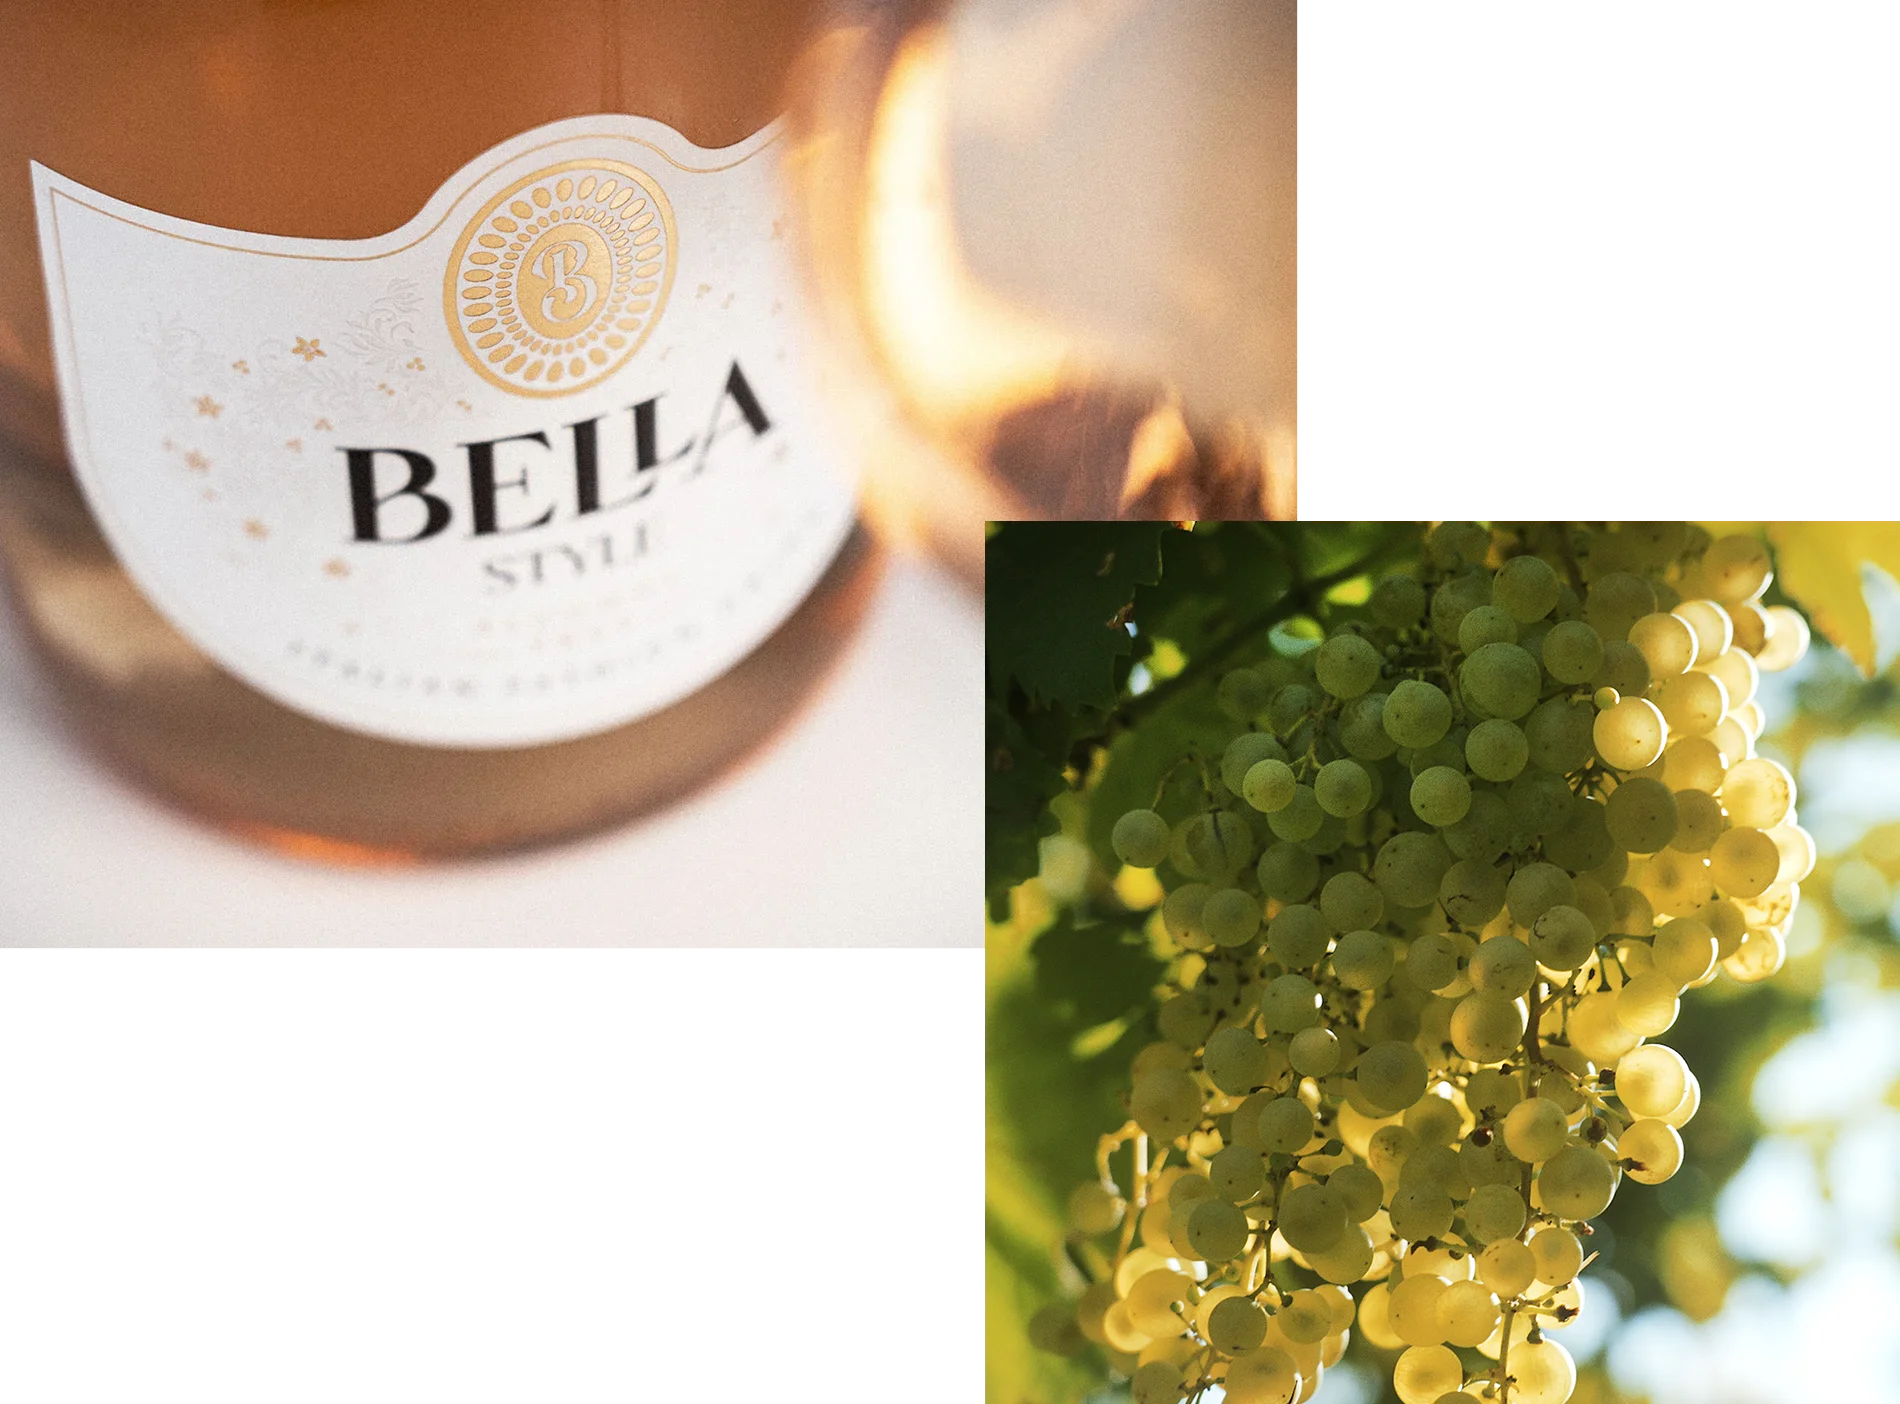 Bella bottle and grapes